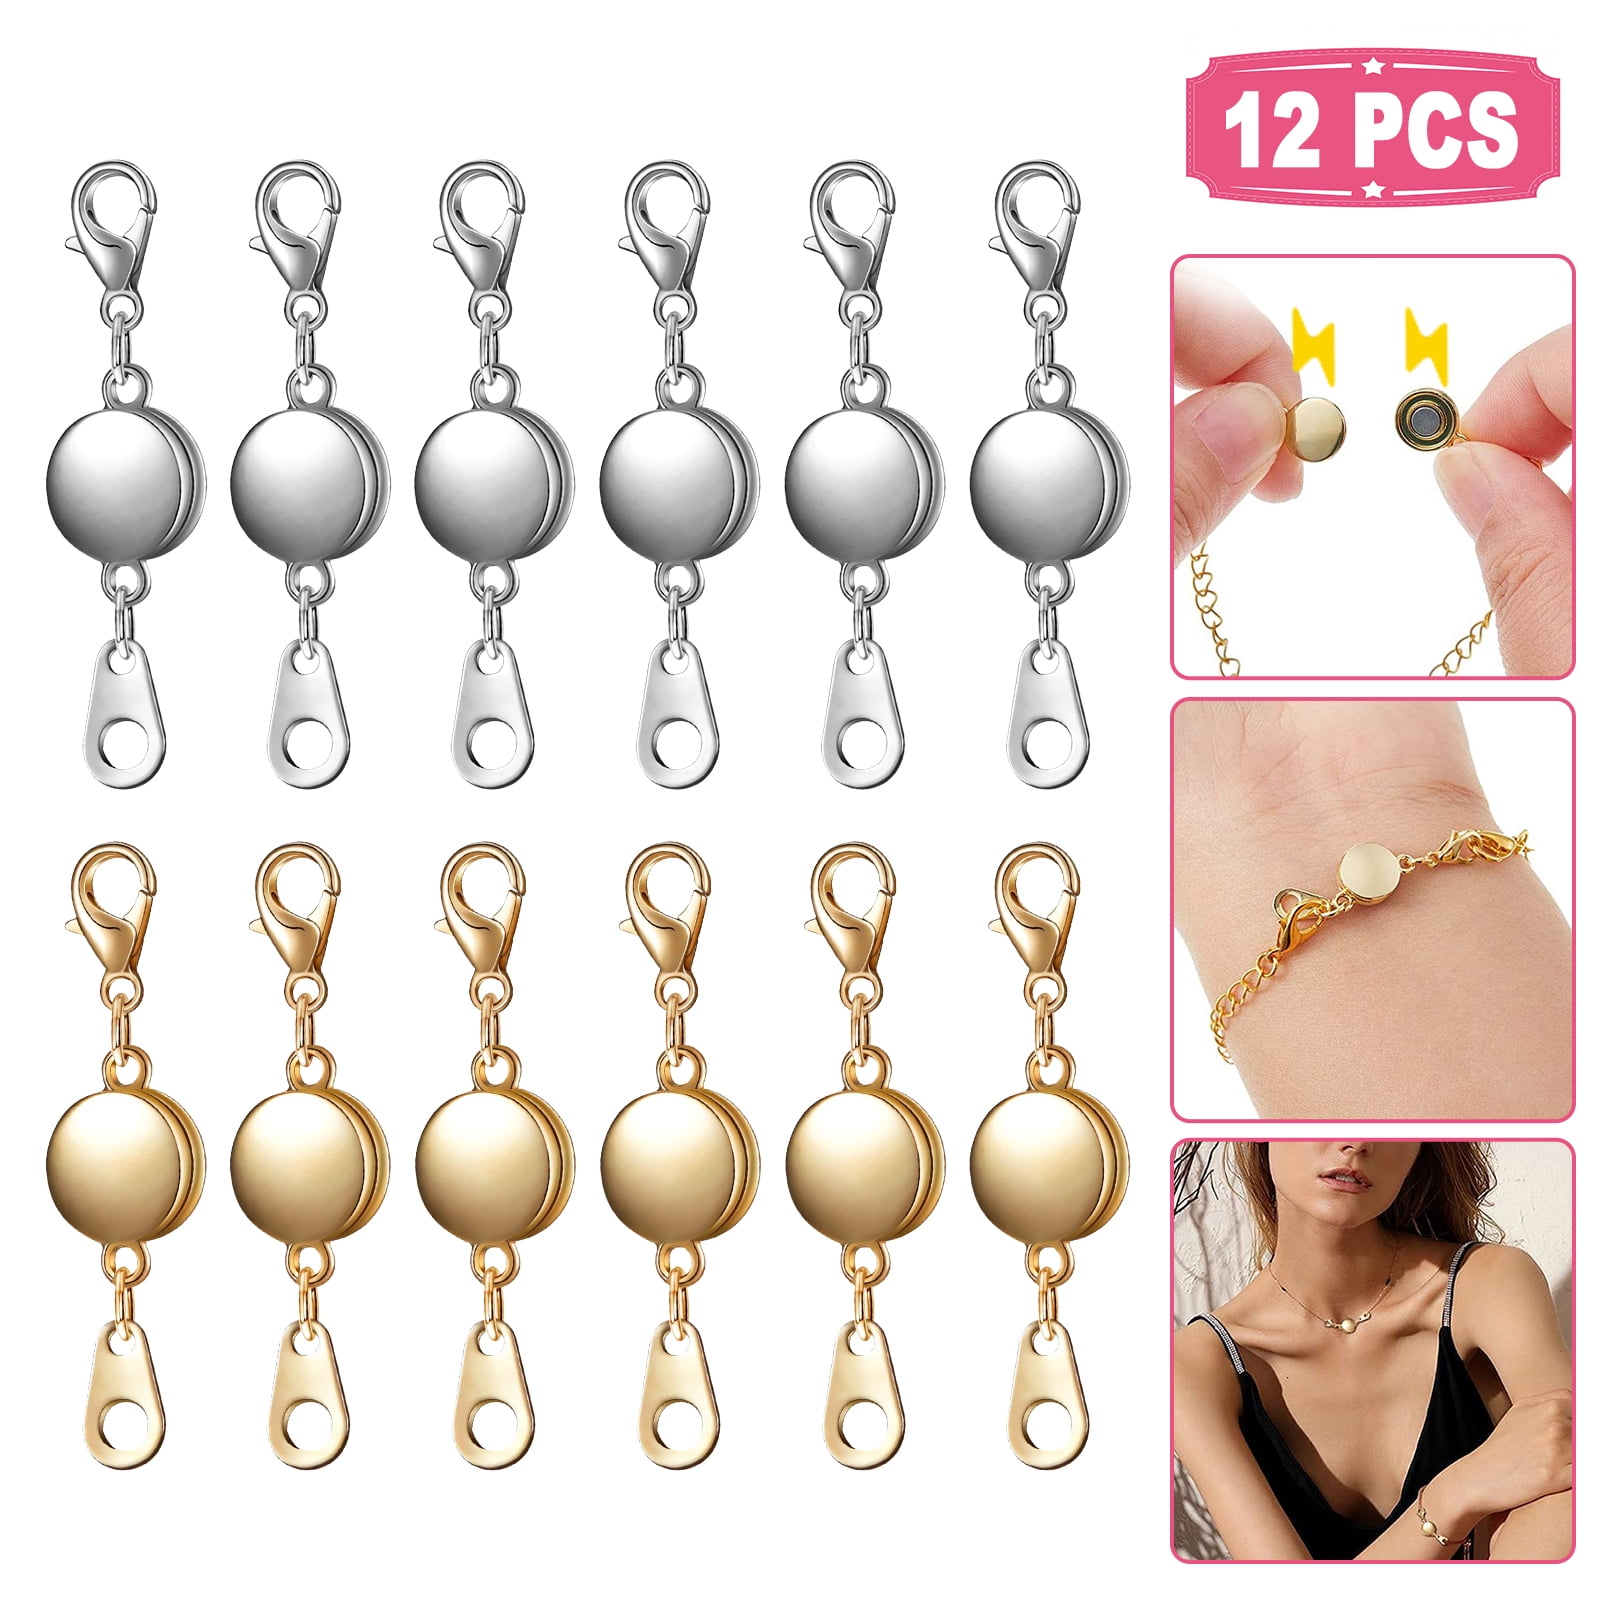 12pcs Magnetic Lobster Clasps, Locking Magnetic Jewelry Clasp, Round Necklace Clasp Closures Bracelet Extender, Magnetic Locking Clasps Connector for